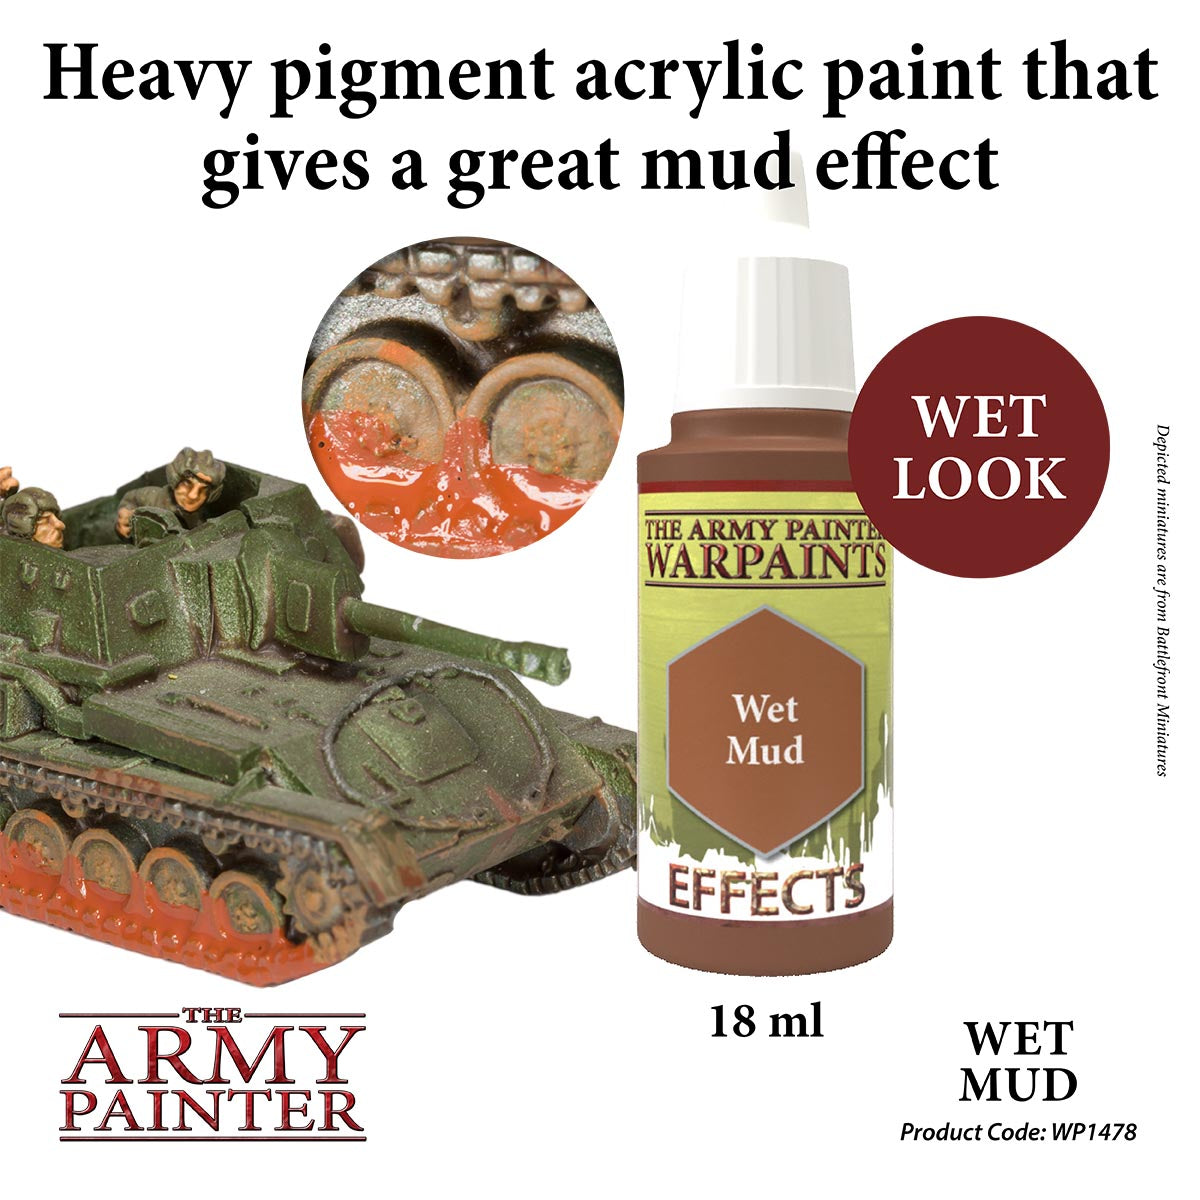 The Army Painter Warpaints - Wet Mud (18ml) WP1478